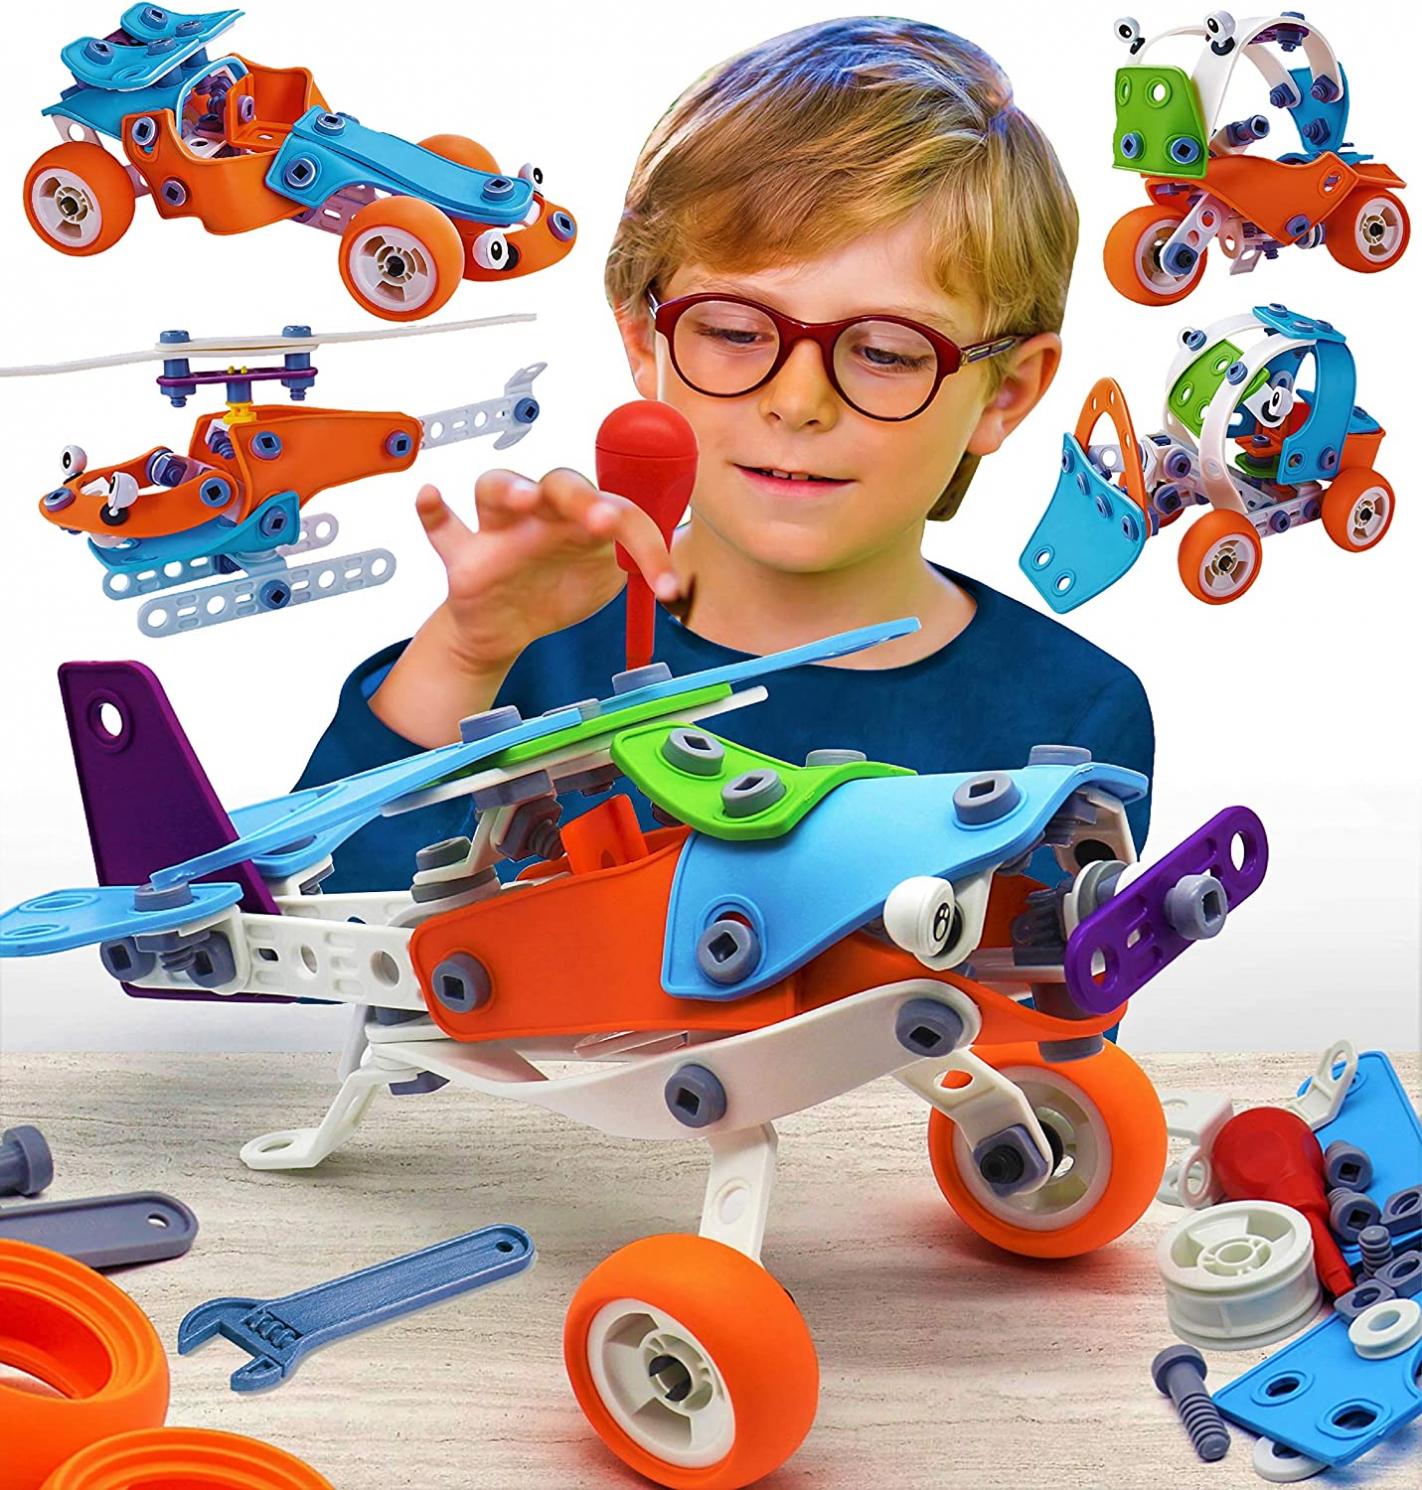 Marom - play a lot Building Toys for Boys Age 6-8 Year Old Boy Gift Best Educational Toys for Kids 5-7 Stem Building Toy for Boys 8-12 Engineering Building Kit Toys for 6 7 8 9 10 yr Old Birthday Gift